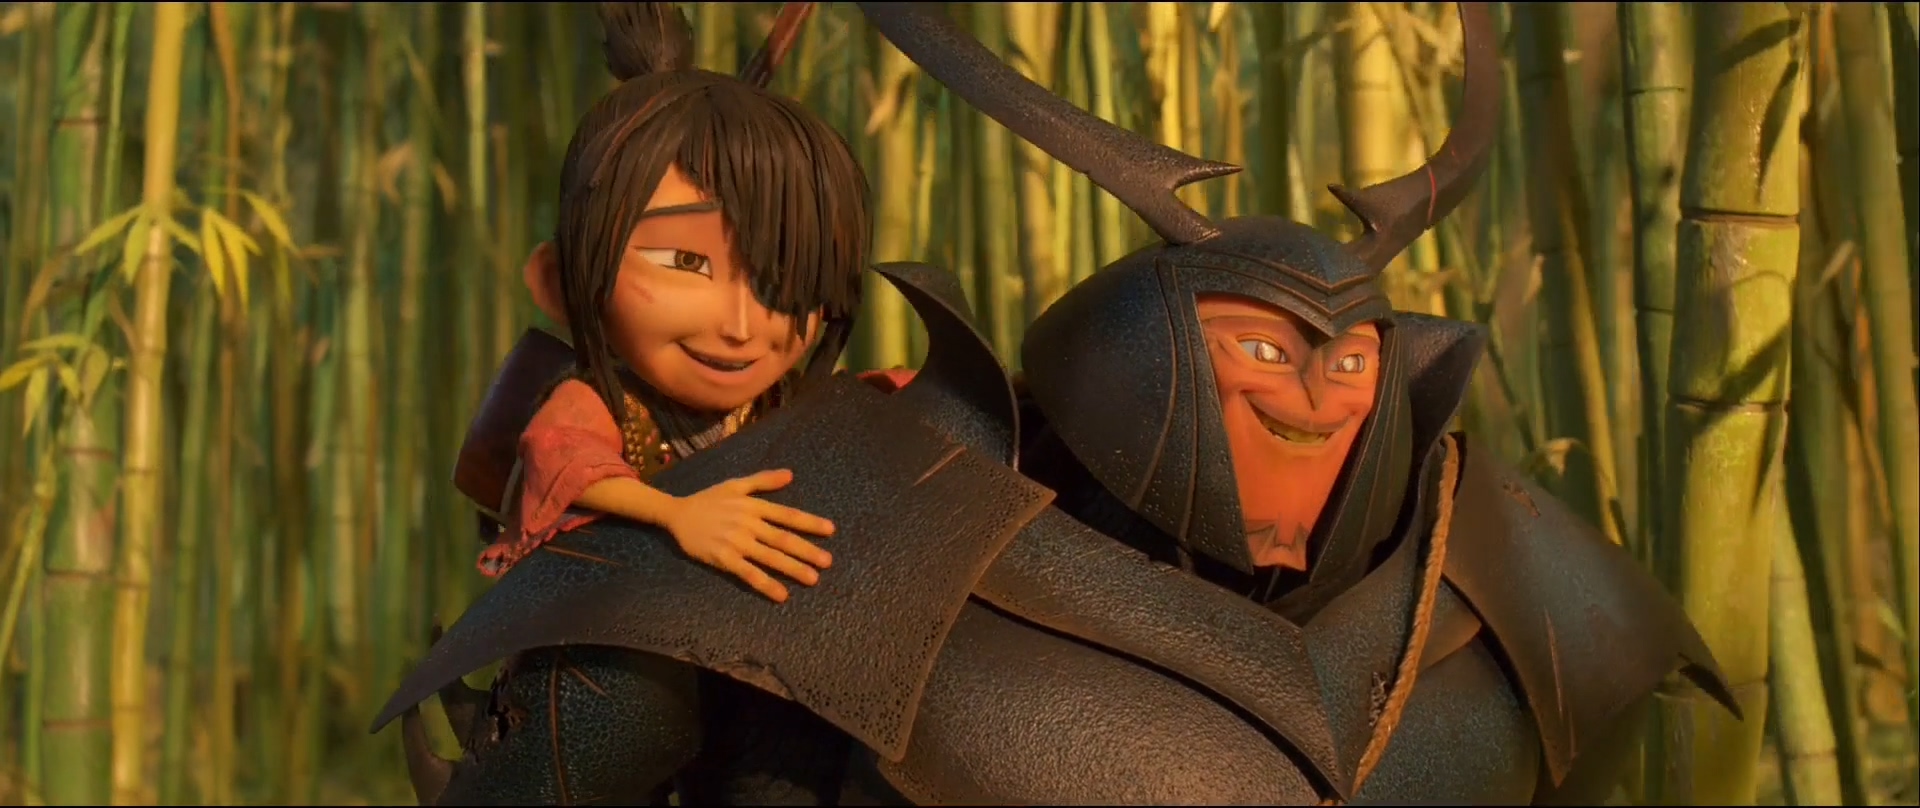 kubo_and_the_two_strings_212845_526.jpg